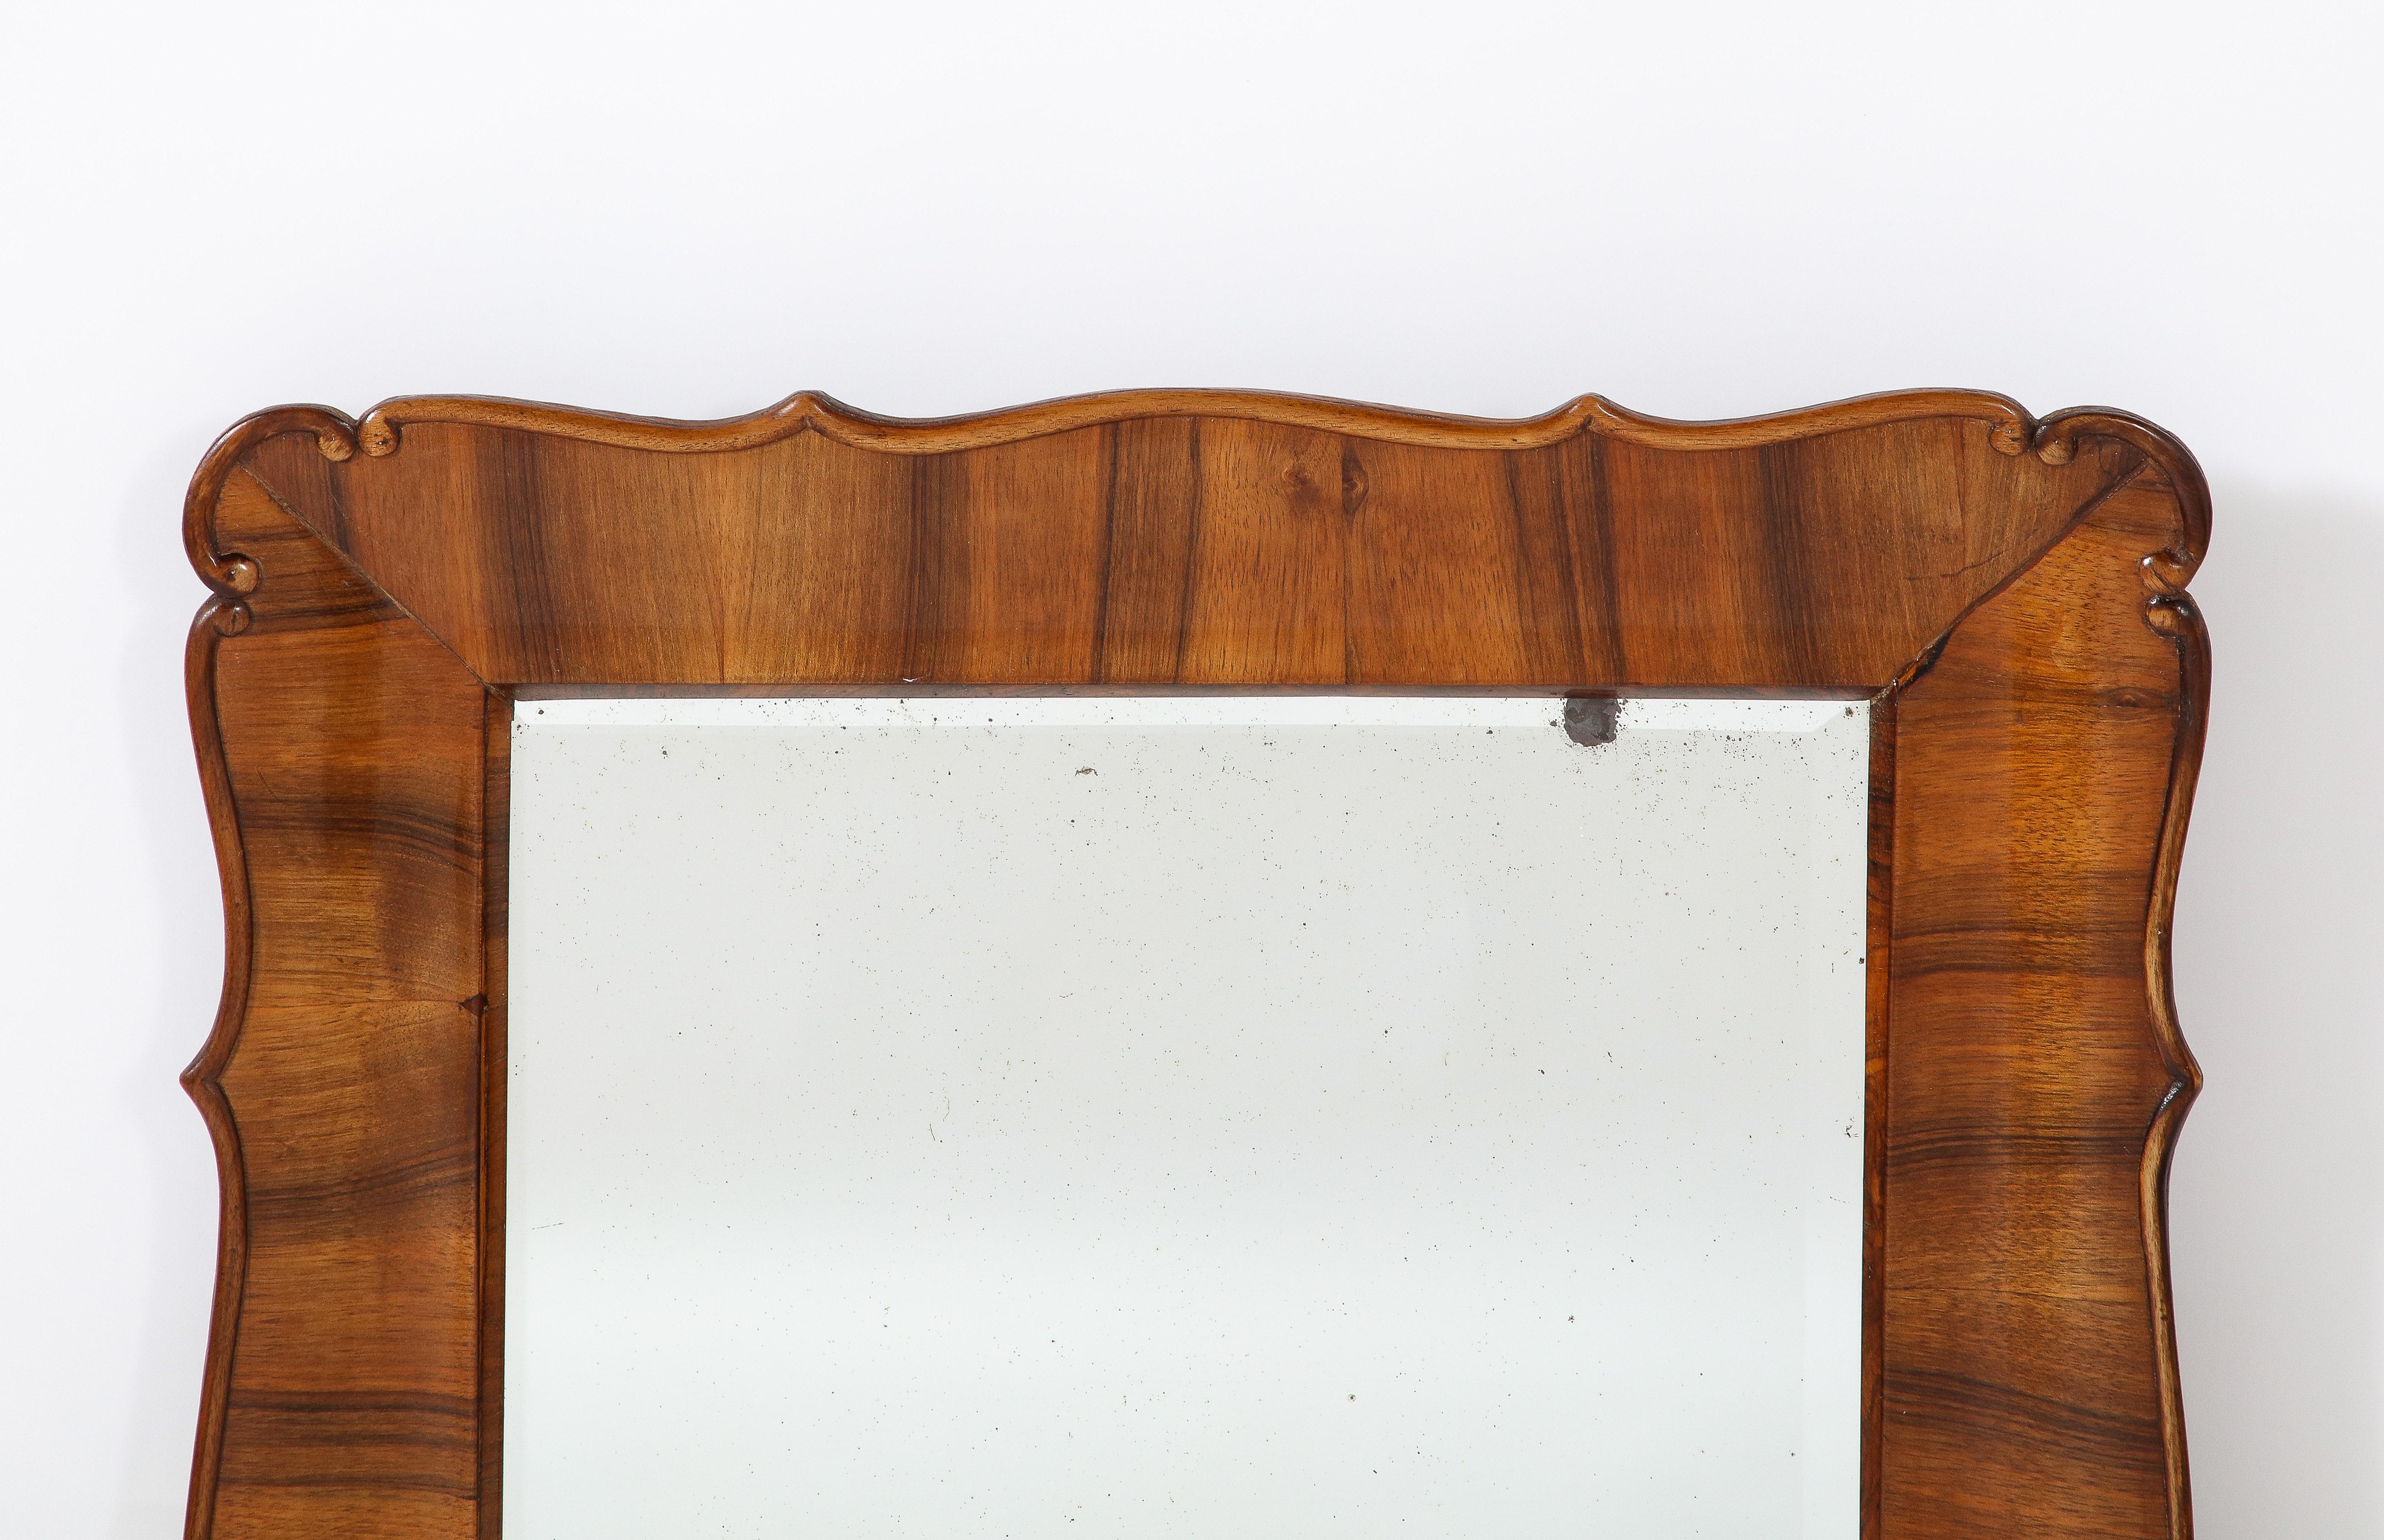 A rare and unique Austrian Biedermeier walnut framed mirror, with scalloped and scrolled hand-carved motif. Highly refined form and elegant design. The rich walnut grained wood so beautifully contrasts with the original beveled plate glass. All